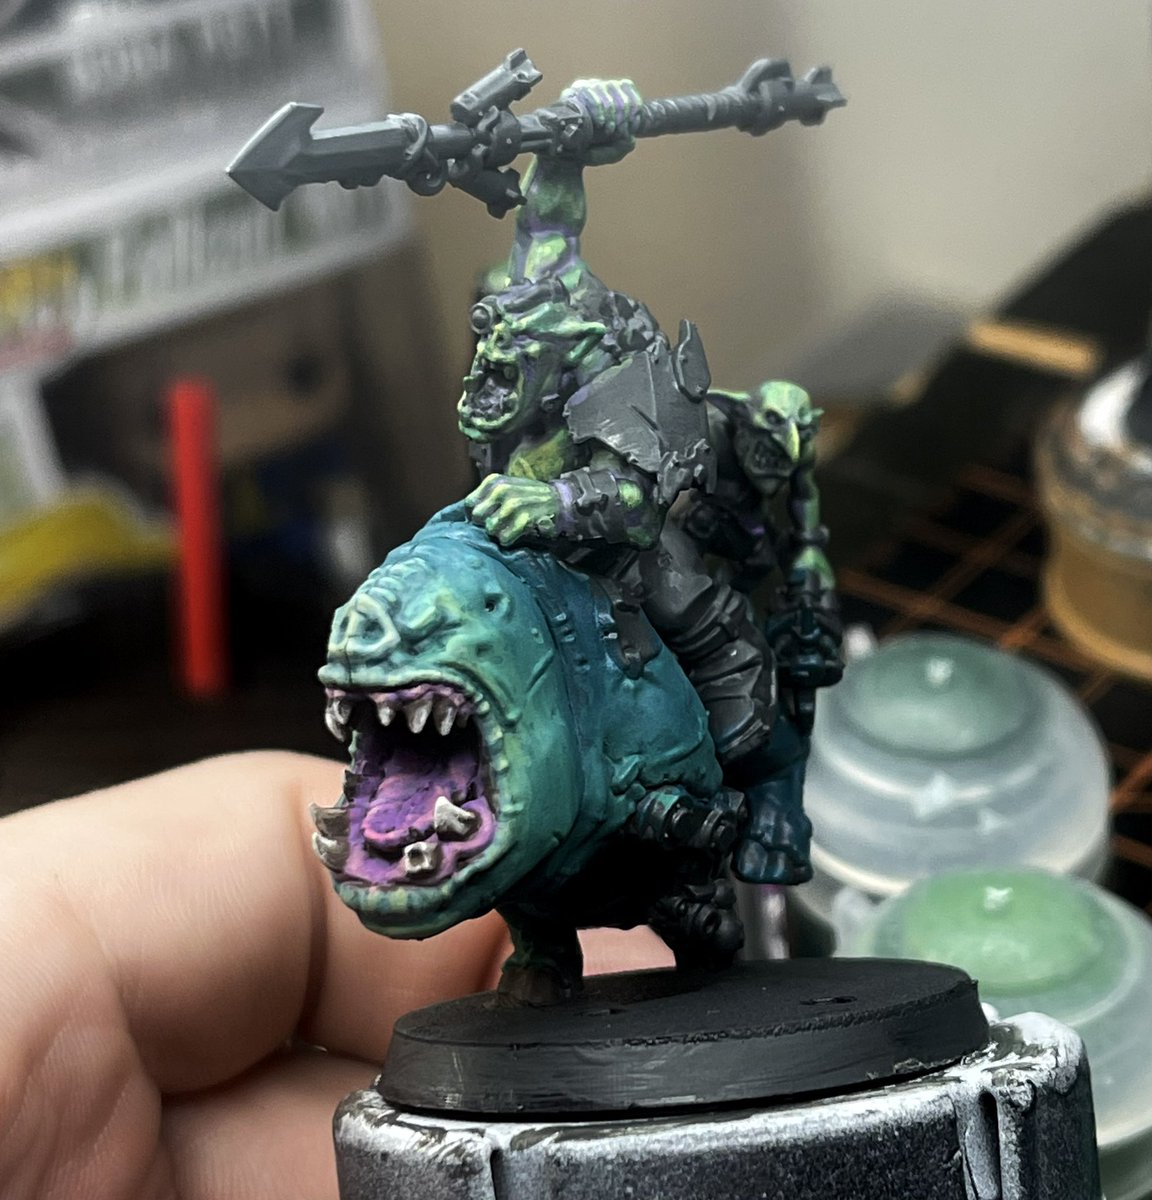 🚧 WIP 🚧 An Ork doesn’t need much aside from a freshly baked WAAAGH! And his faithful Squig. #WarhammerCommunity #hobby #minipainting #Orcs